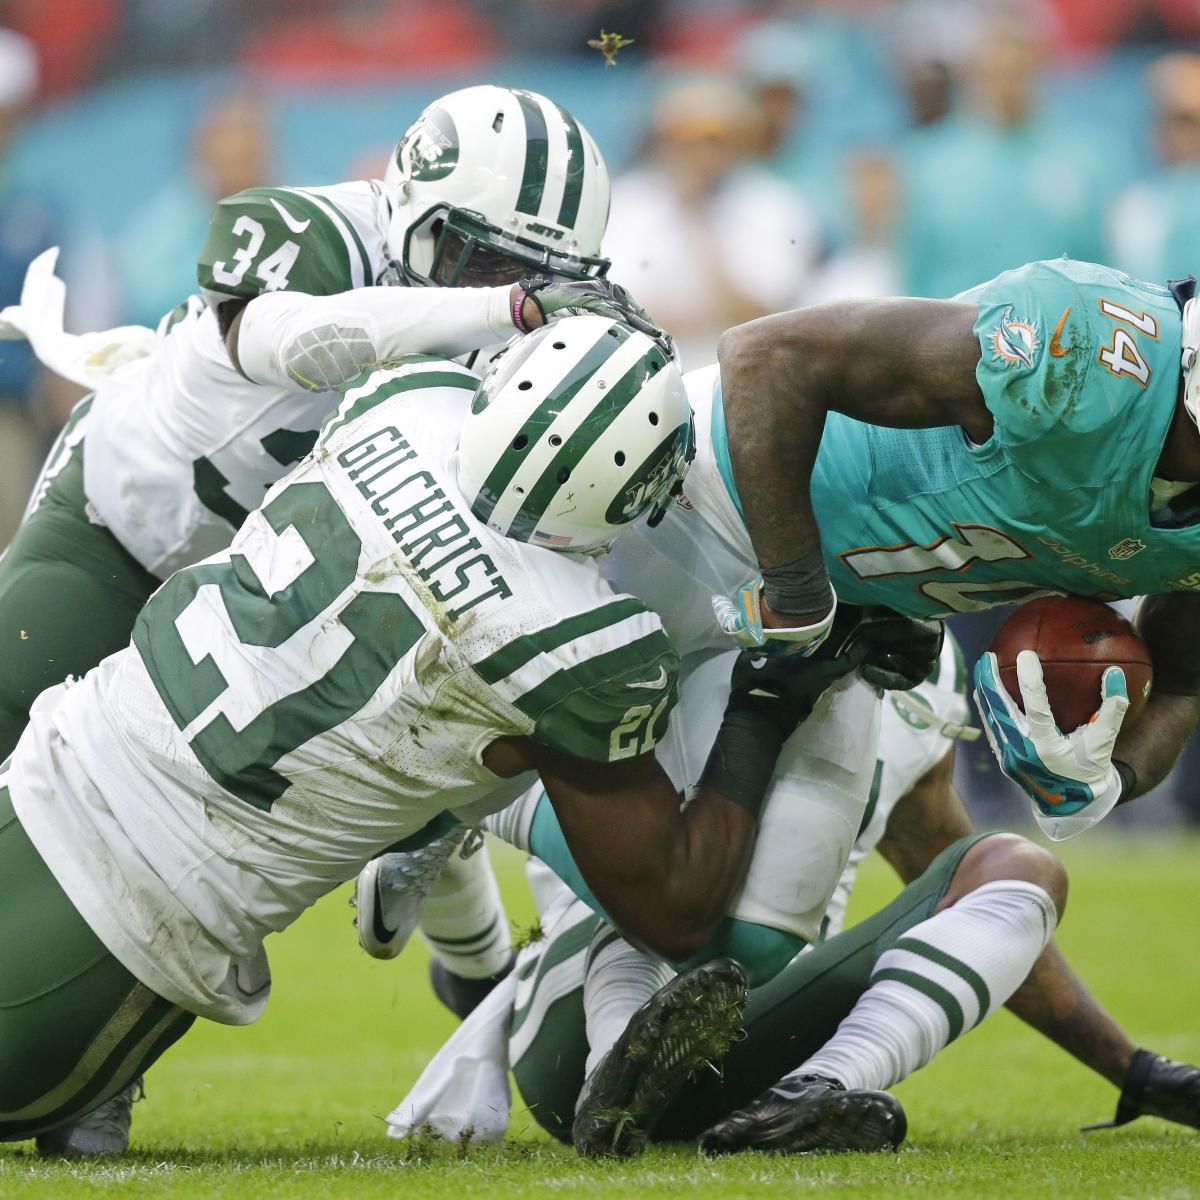 Jets vs. Dolphins Score and Twitter Reaction from Wembley Stadium